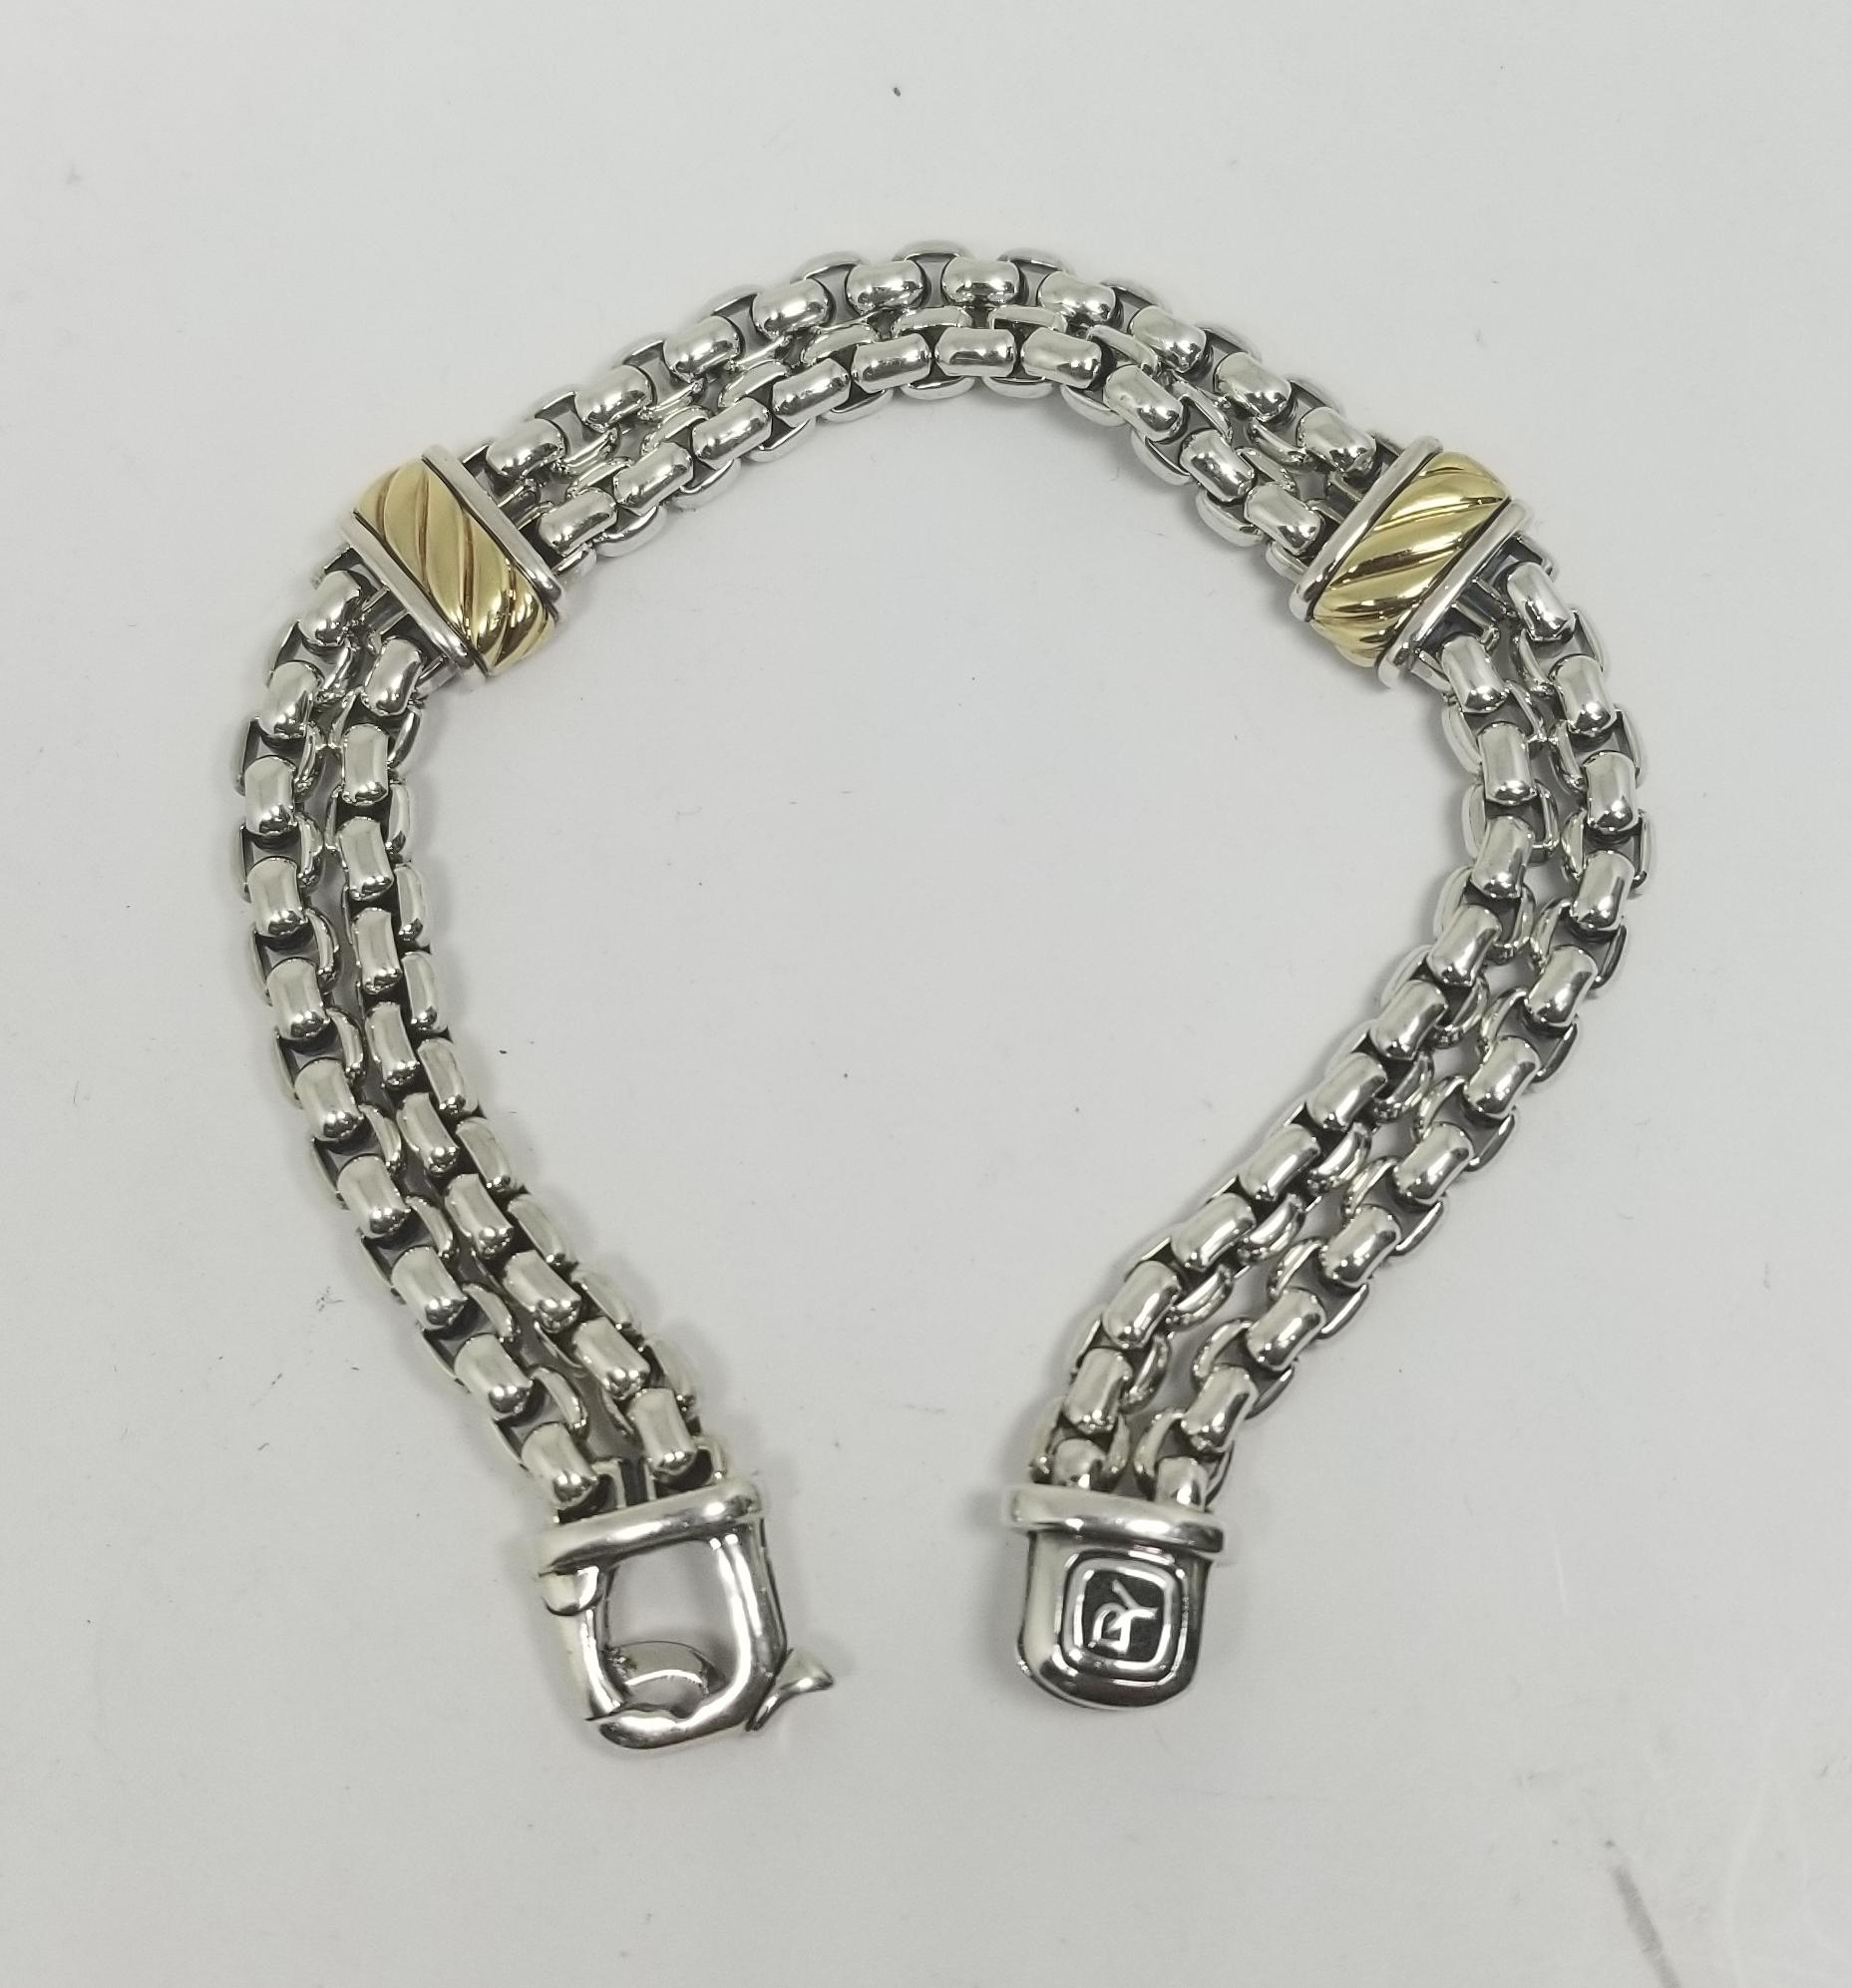 David Yurman Cable Classic Two-row Chain Bracelet with 18K Gold and Silver.  David Yurman’s artistic signature, Cable began as a bracelet that he hand-twisted from 50 feet of wire. For the past 30 years, he has evolved the twisted helix into a